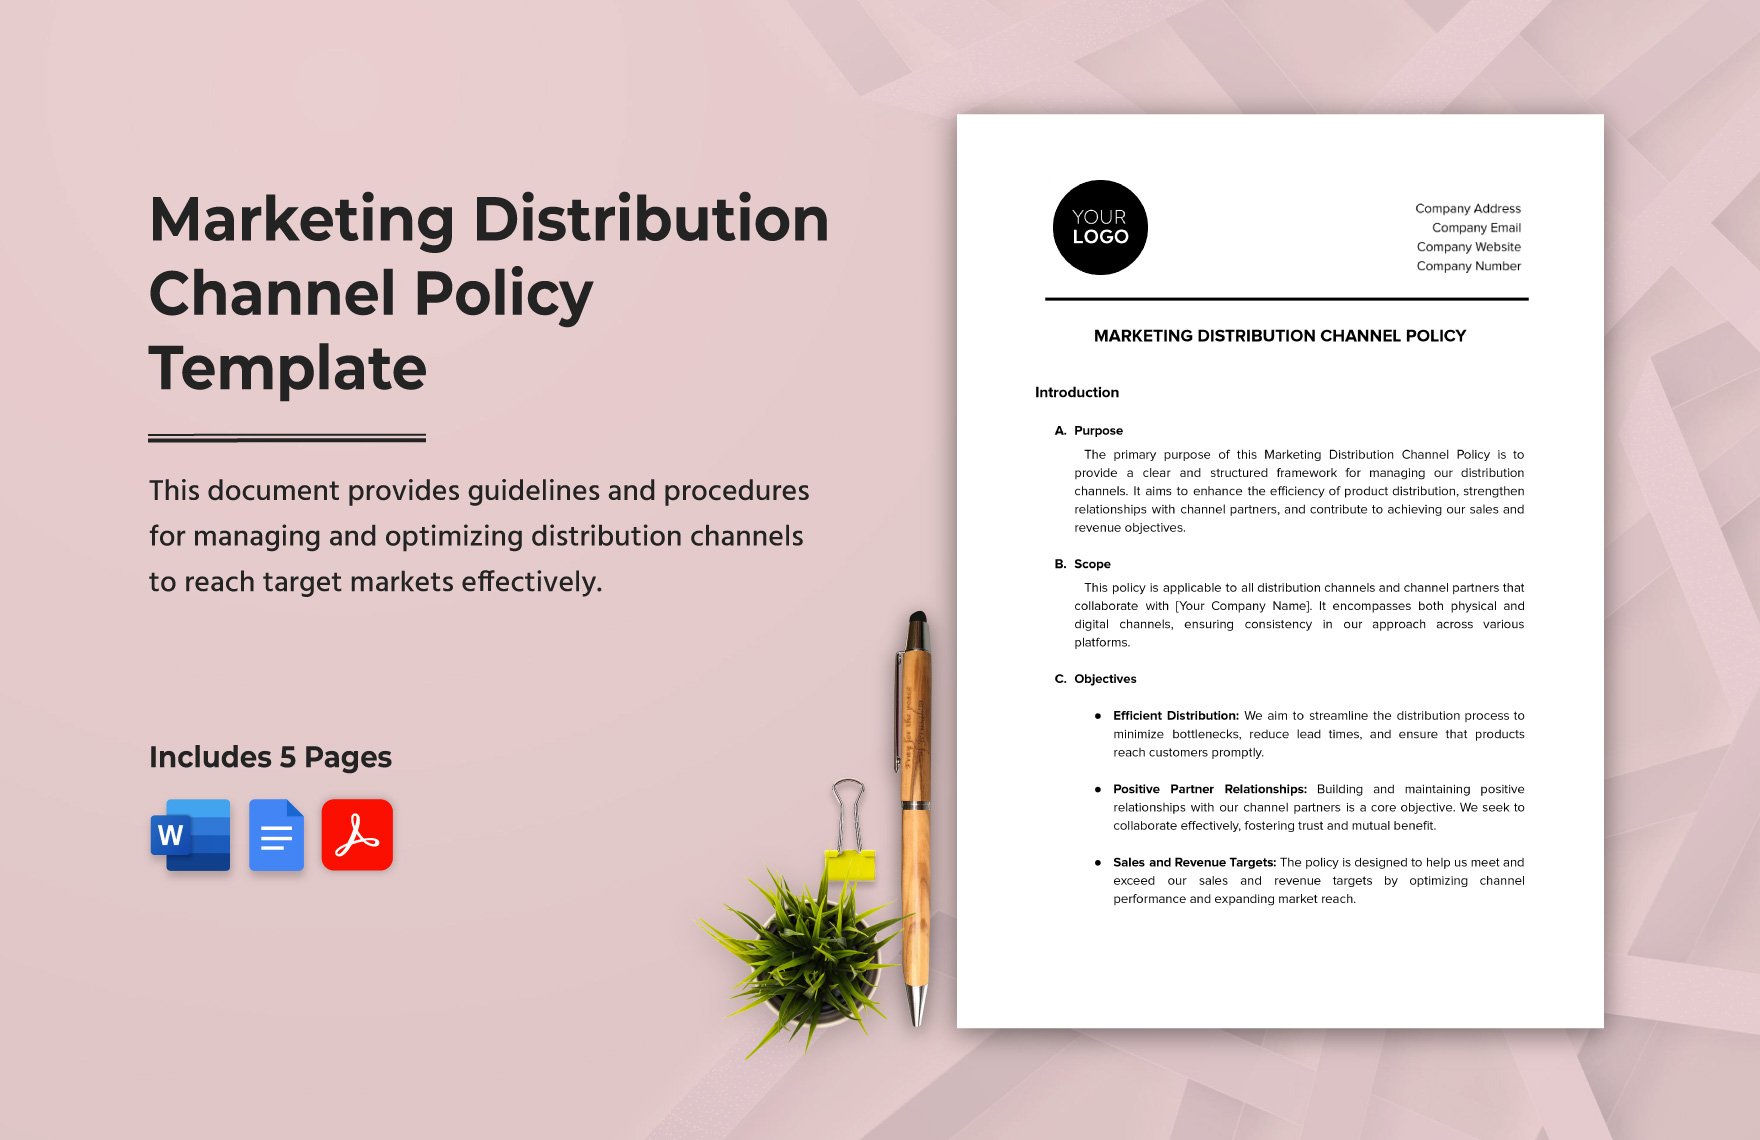 Marketing Distribution Channel Policy Template in Word, Google Docs, PDF